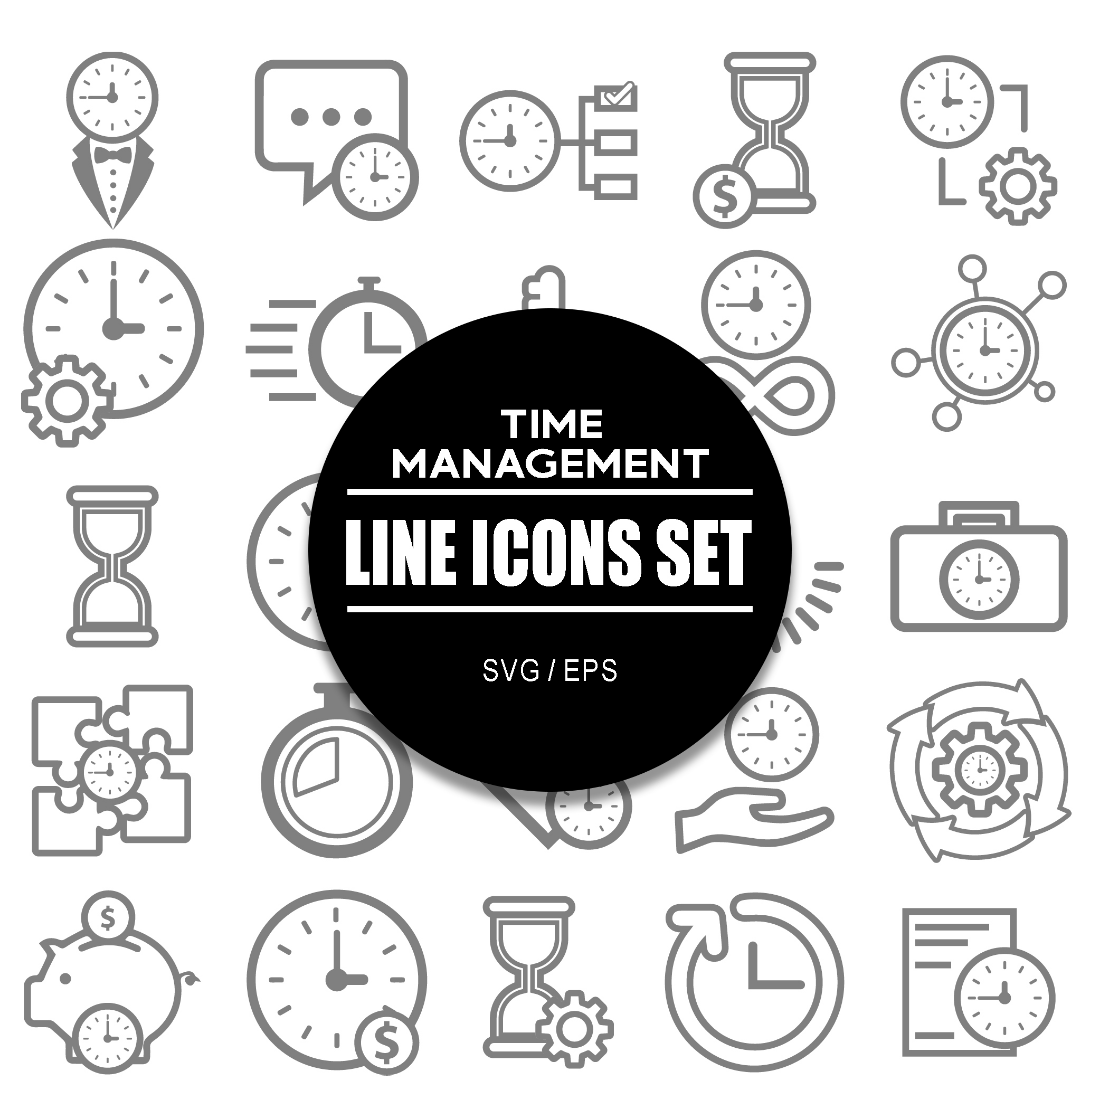 Time Management Icon Set cover image.